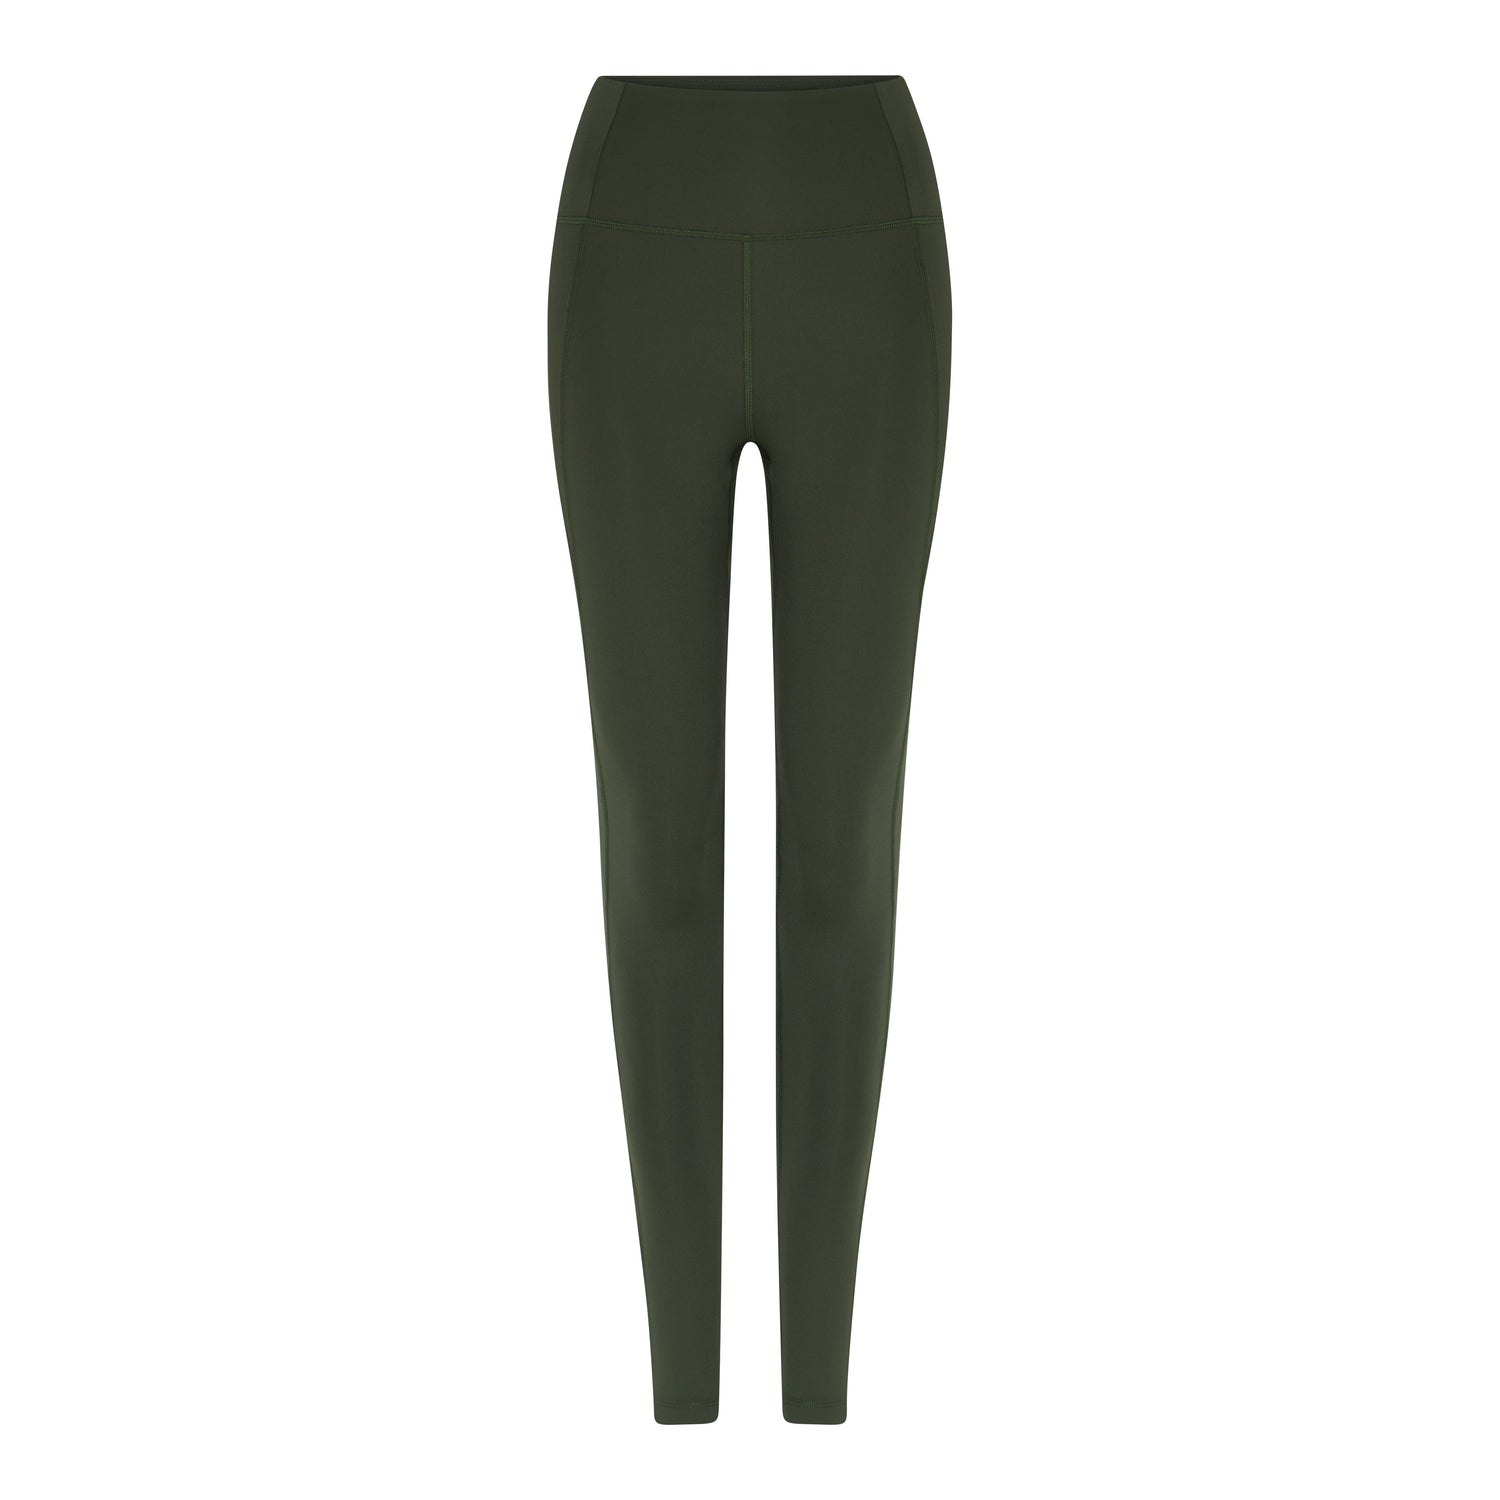 Girlfriend Collective W's Compressive Legging - 7/8 - Made From Recycled Plastic Bottles Seaweed Pants